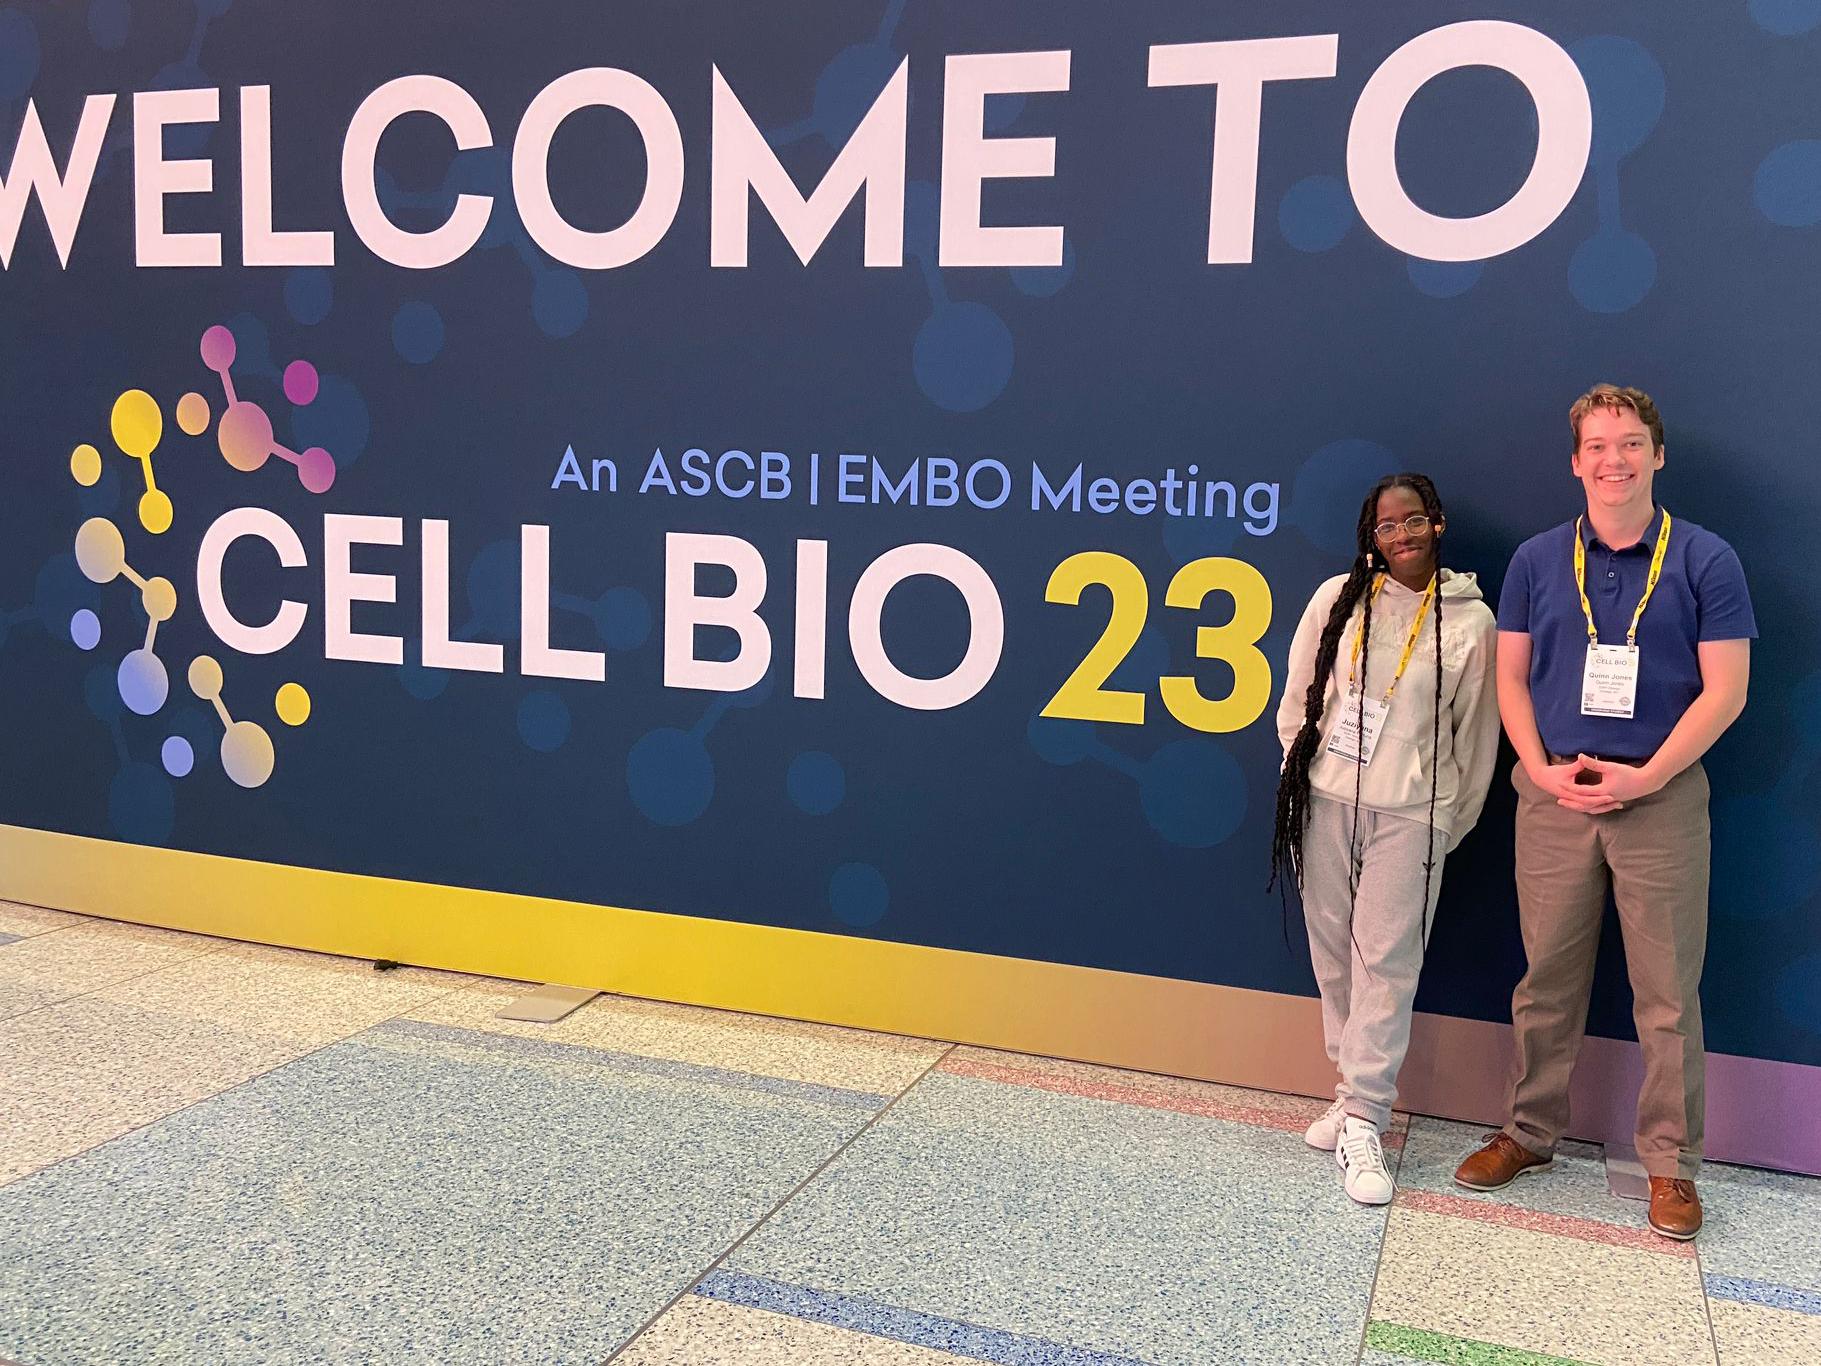 SUNY Oswego biological sciences students Juziyana Fortuna and Quinn Jones presented the research they are conducting at Cell Bio 2023